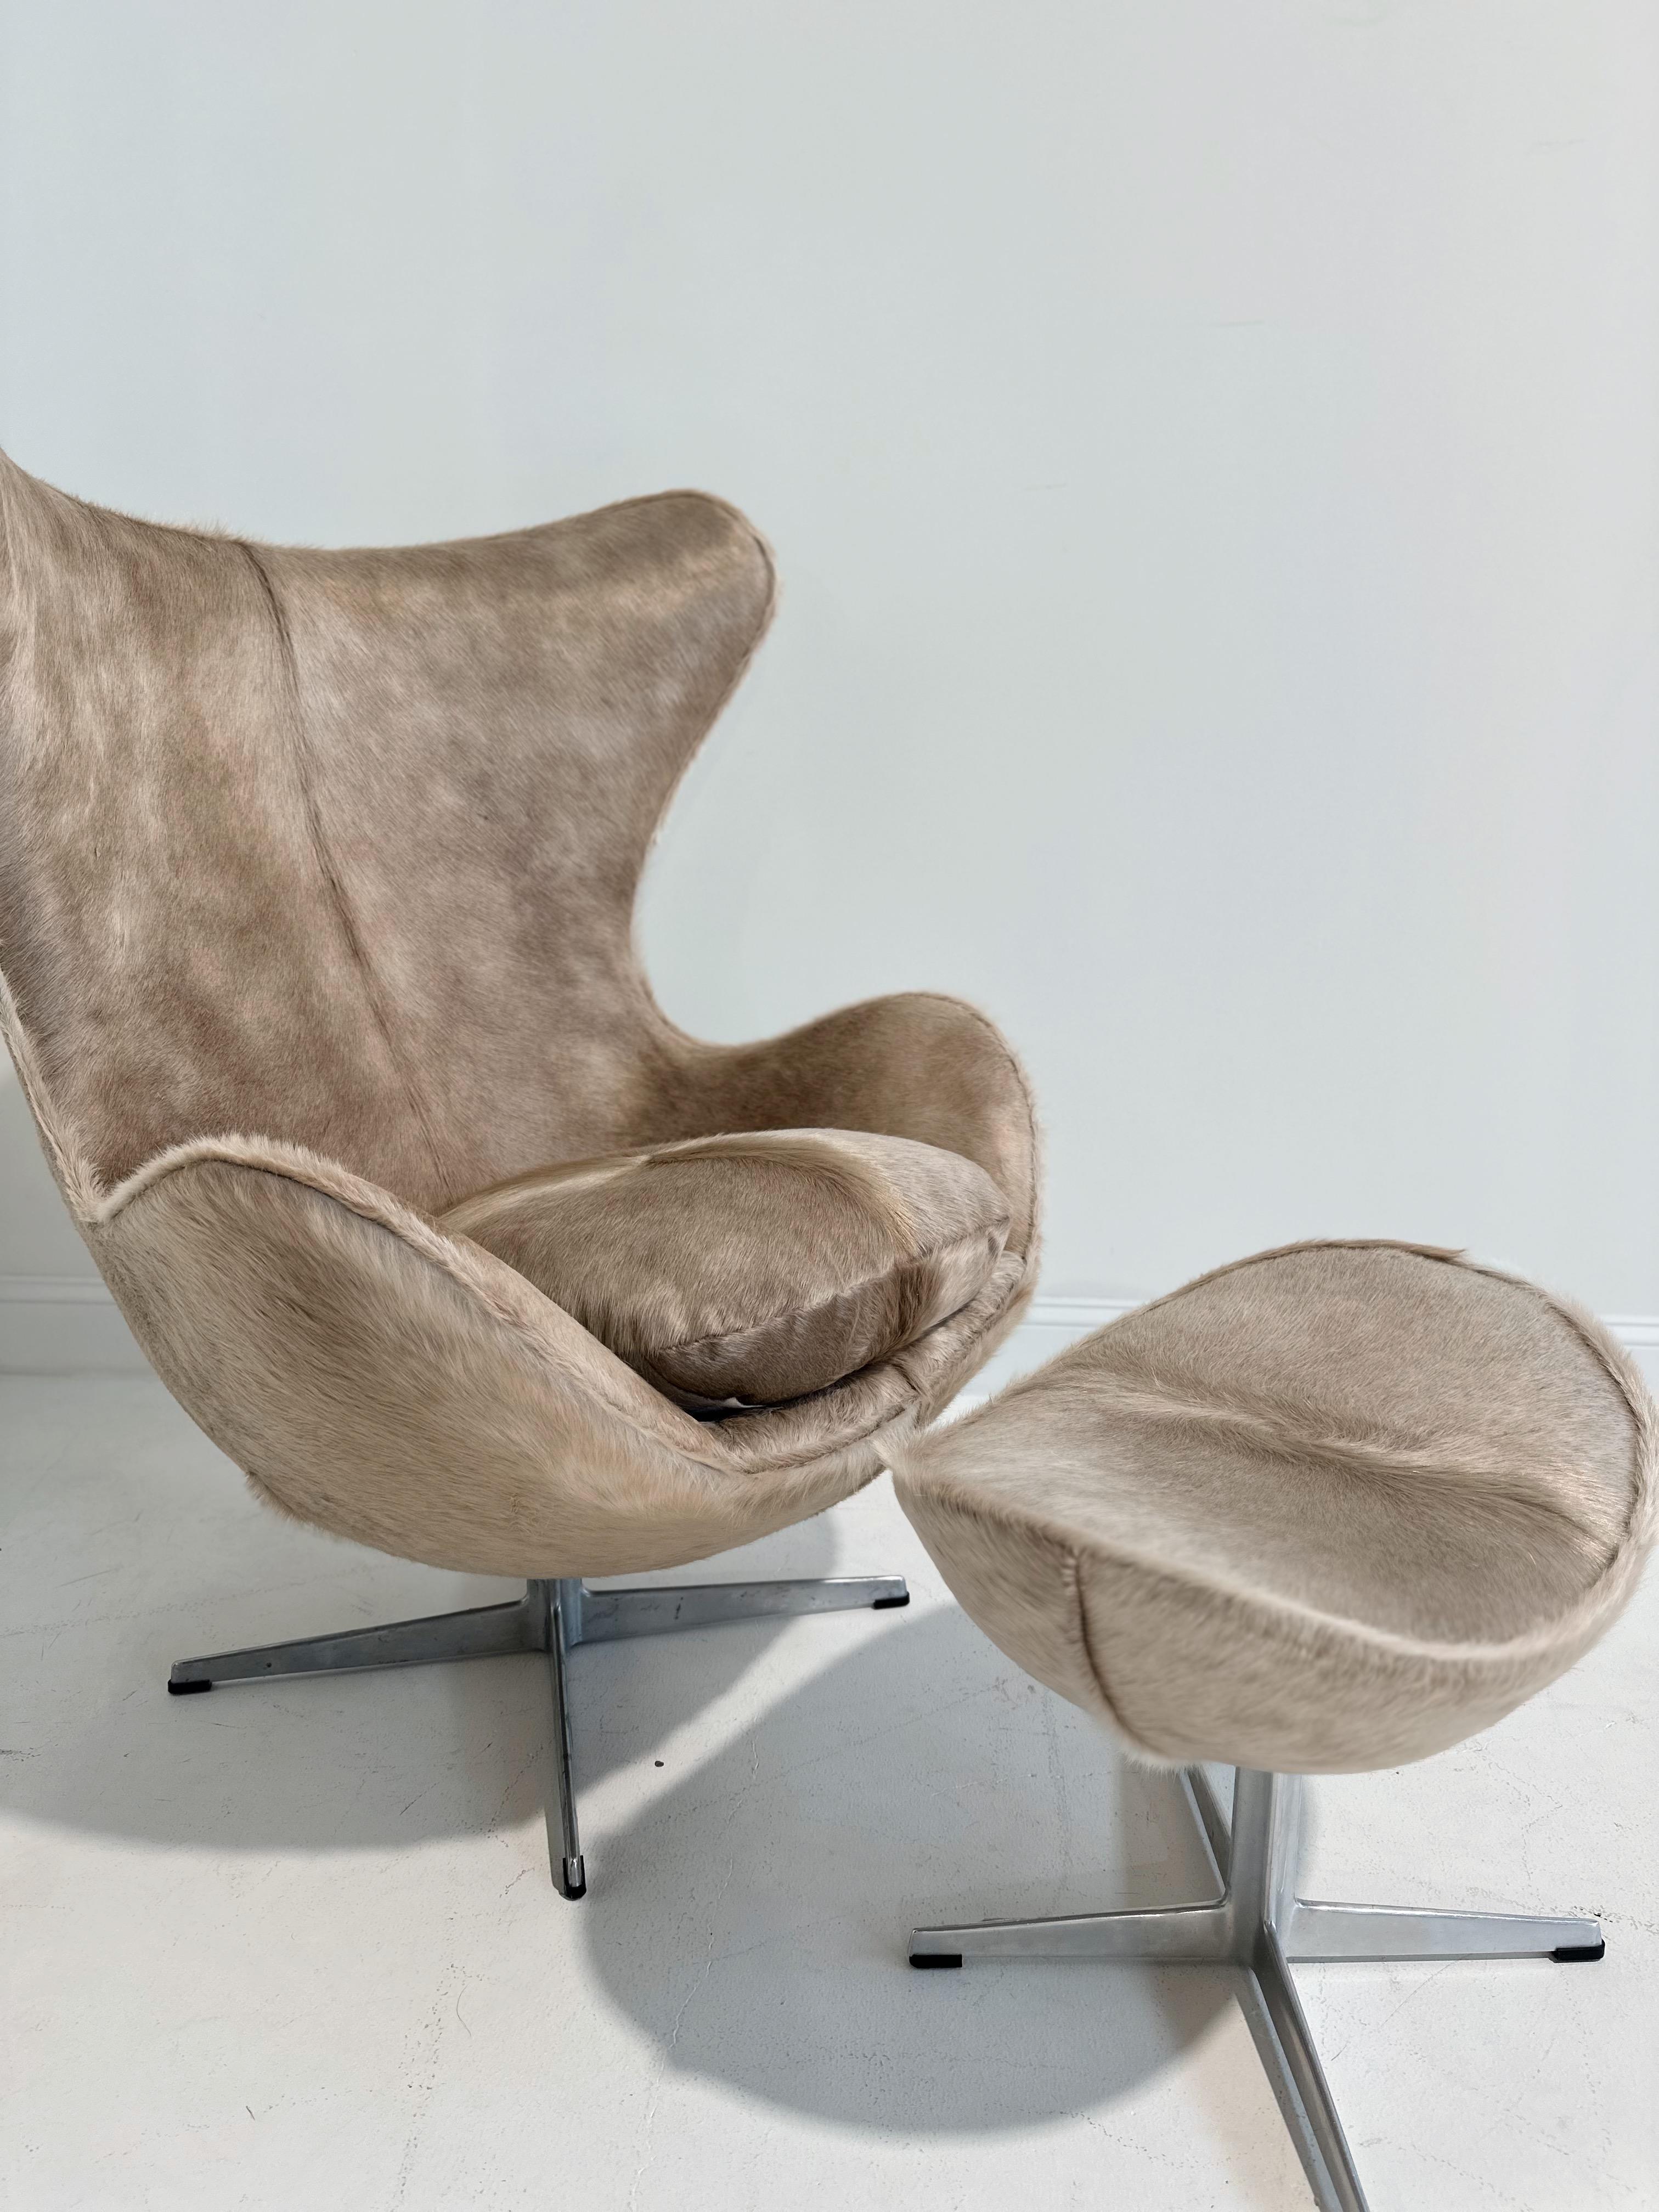 One of a kind.

Ask any lover of mid-century furniture to name the top 5 iconic chairs of mcm design and we guarantee the Egg chair would be on that list. The Forsyth design team was over the moon when we collected this amazing, original Arne